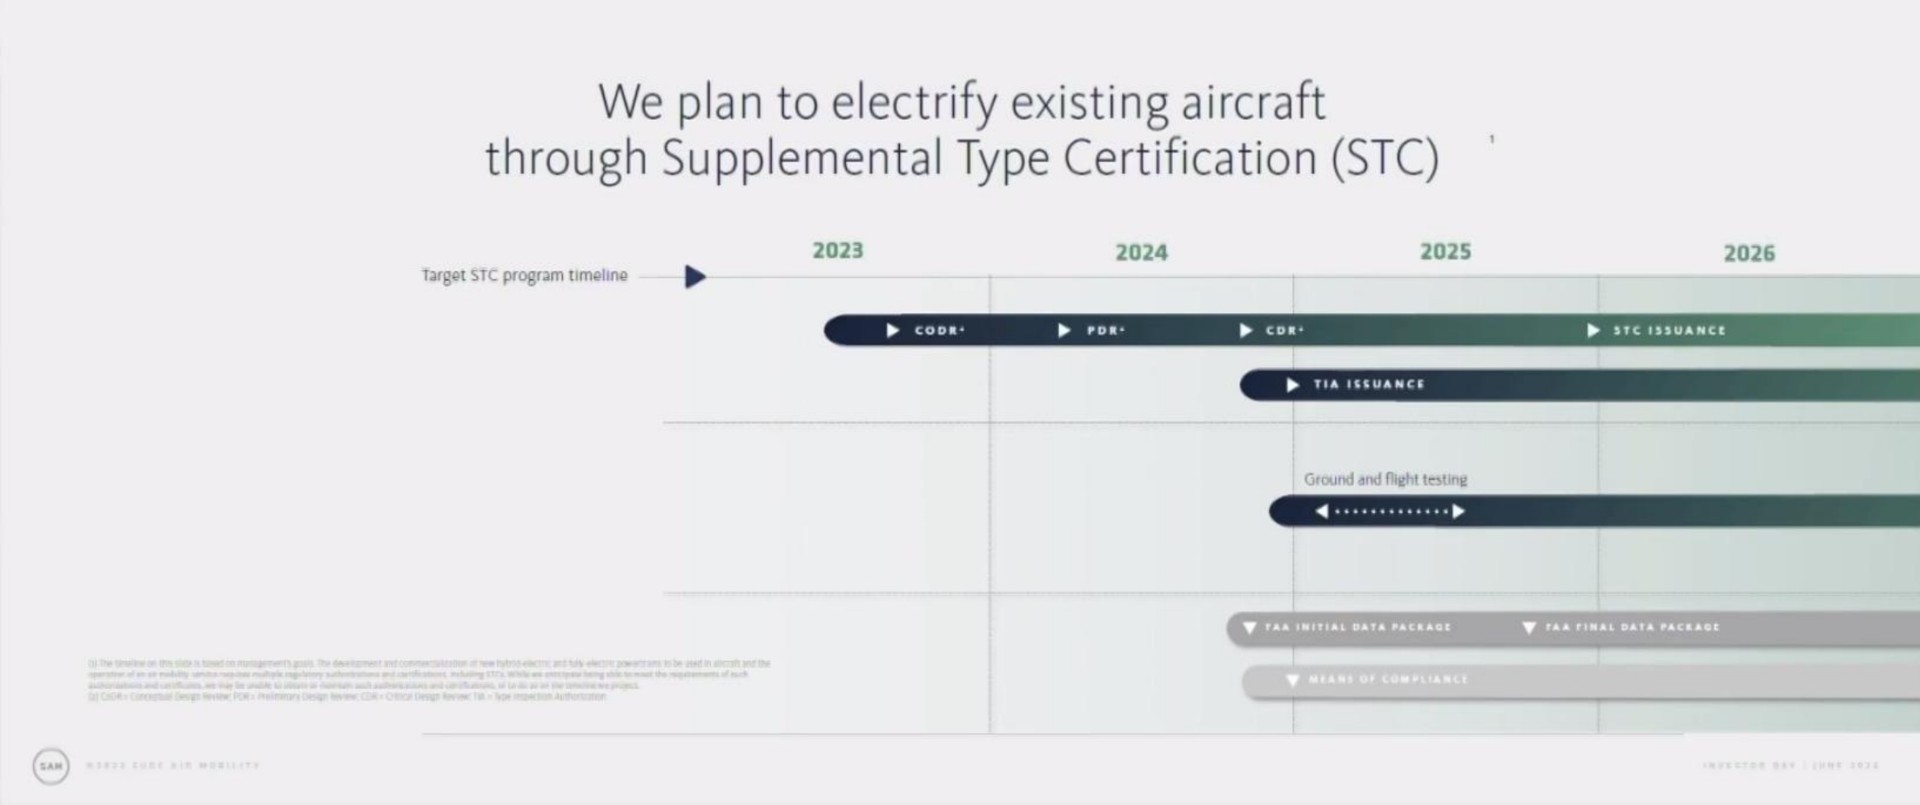 we plan to electrify existing aircraft through supplemental type certification | Surf Air